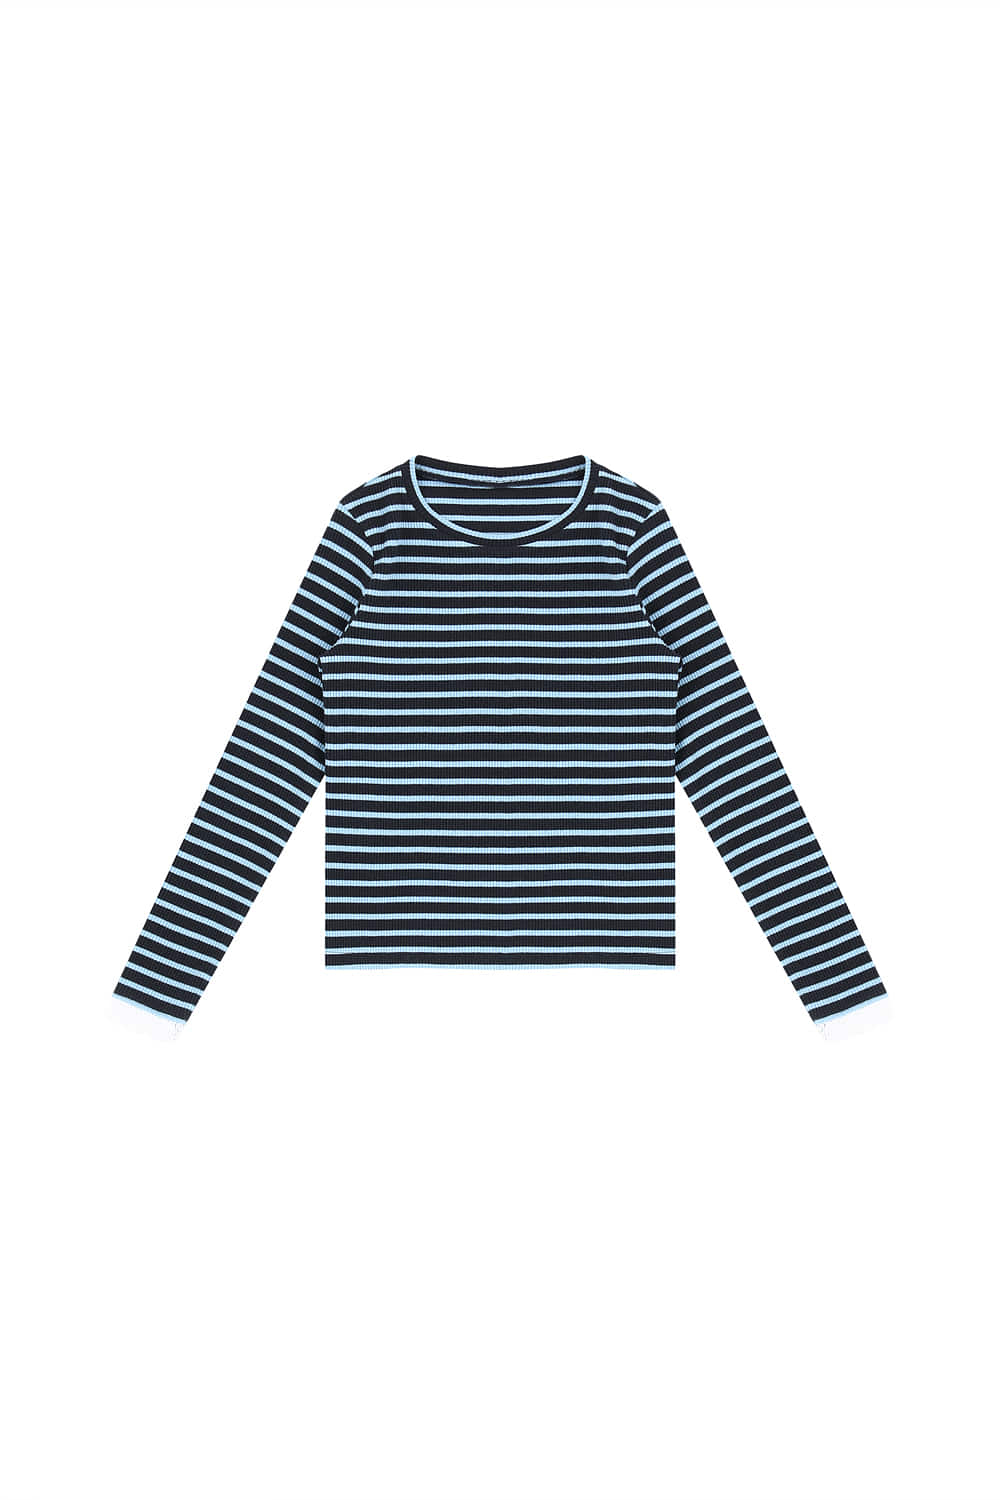 ORDINARY PEOPLE FRILL SLEEVE POINT BLUE STRIPE T-SHIRTS